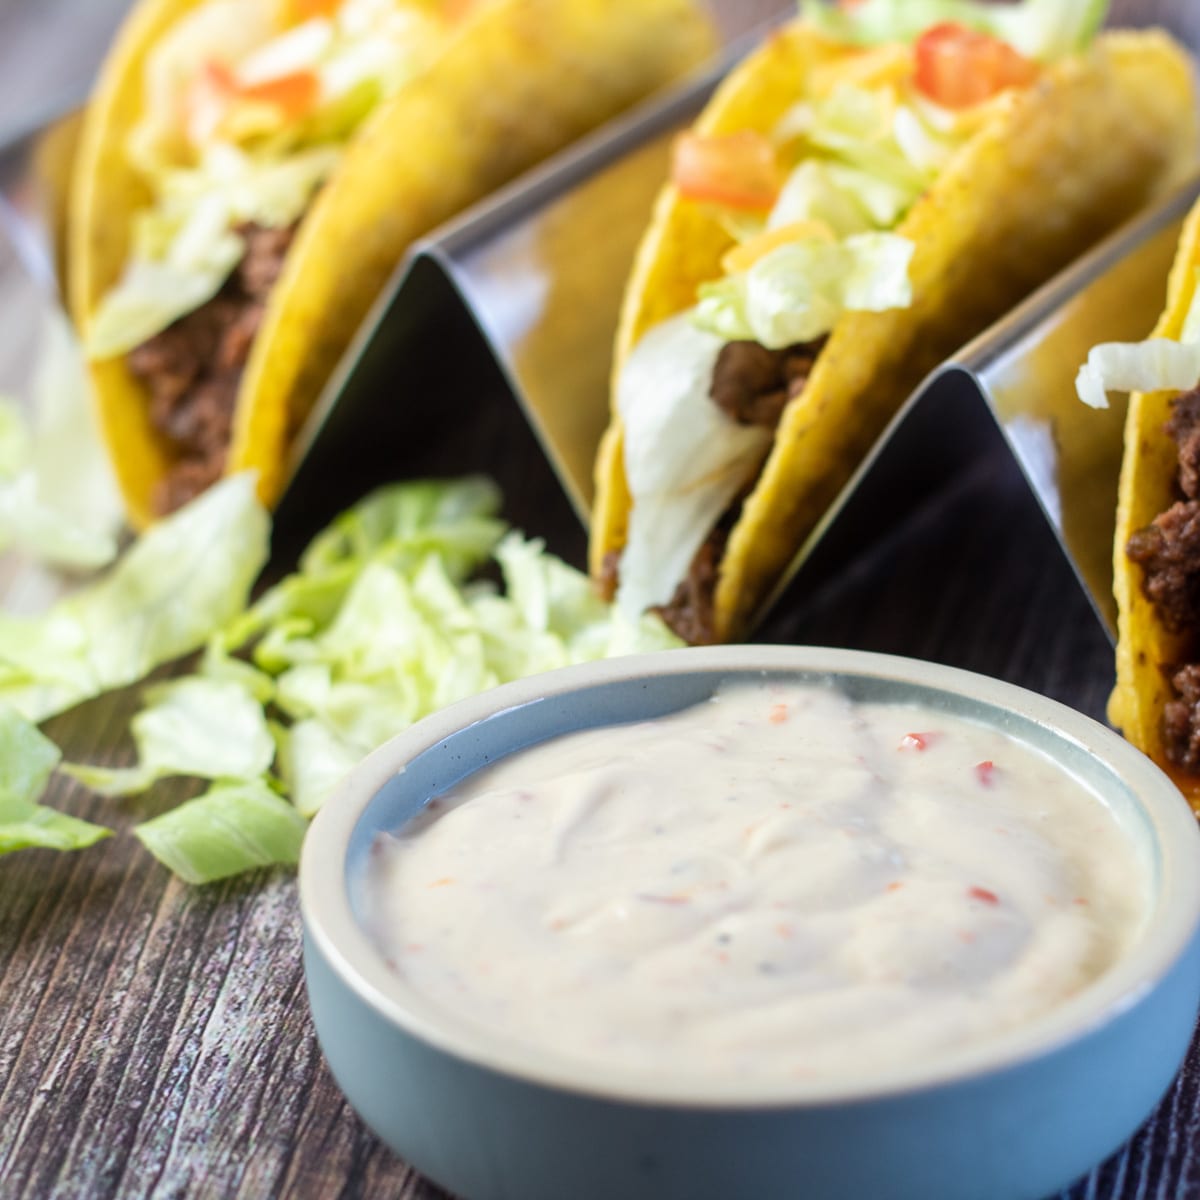 Square image showing tacos and Taco Bell creamy Baja sauce.